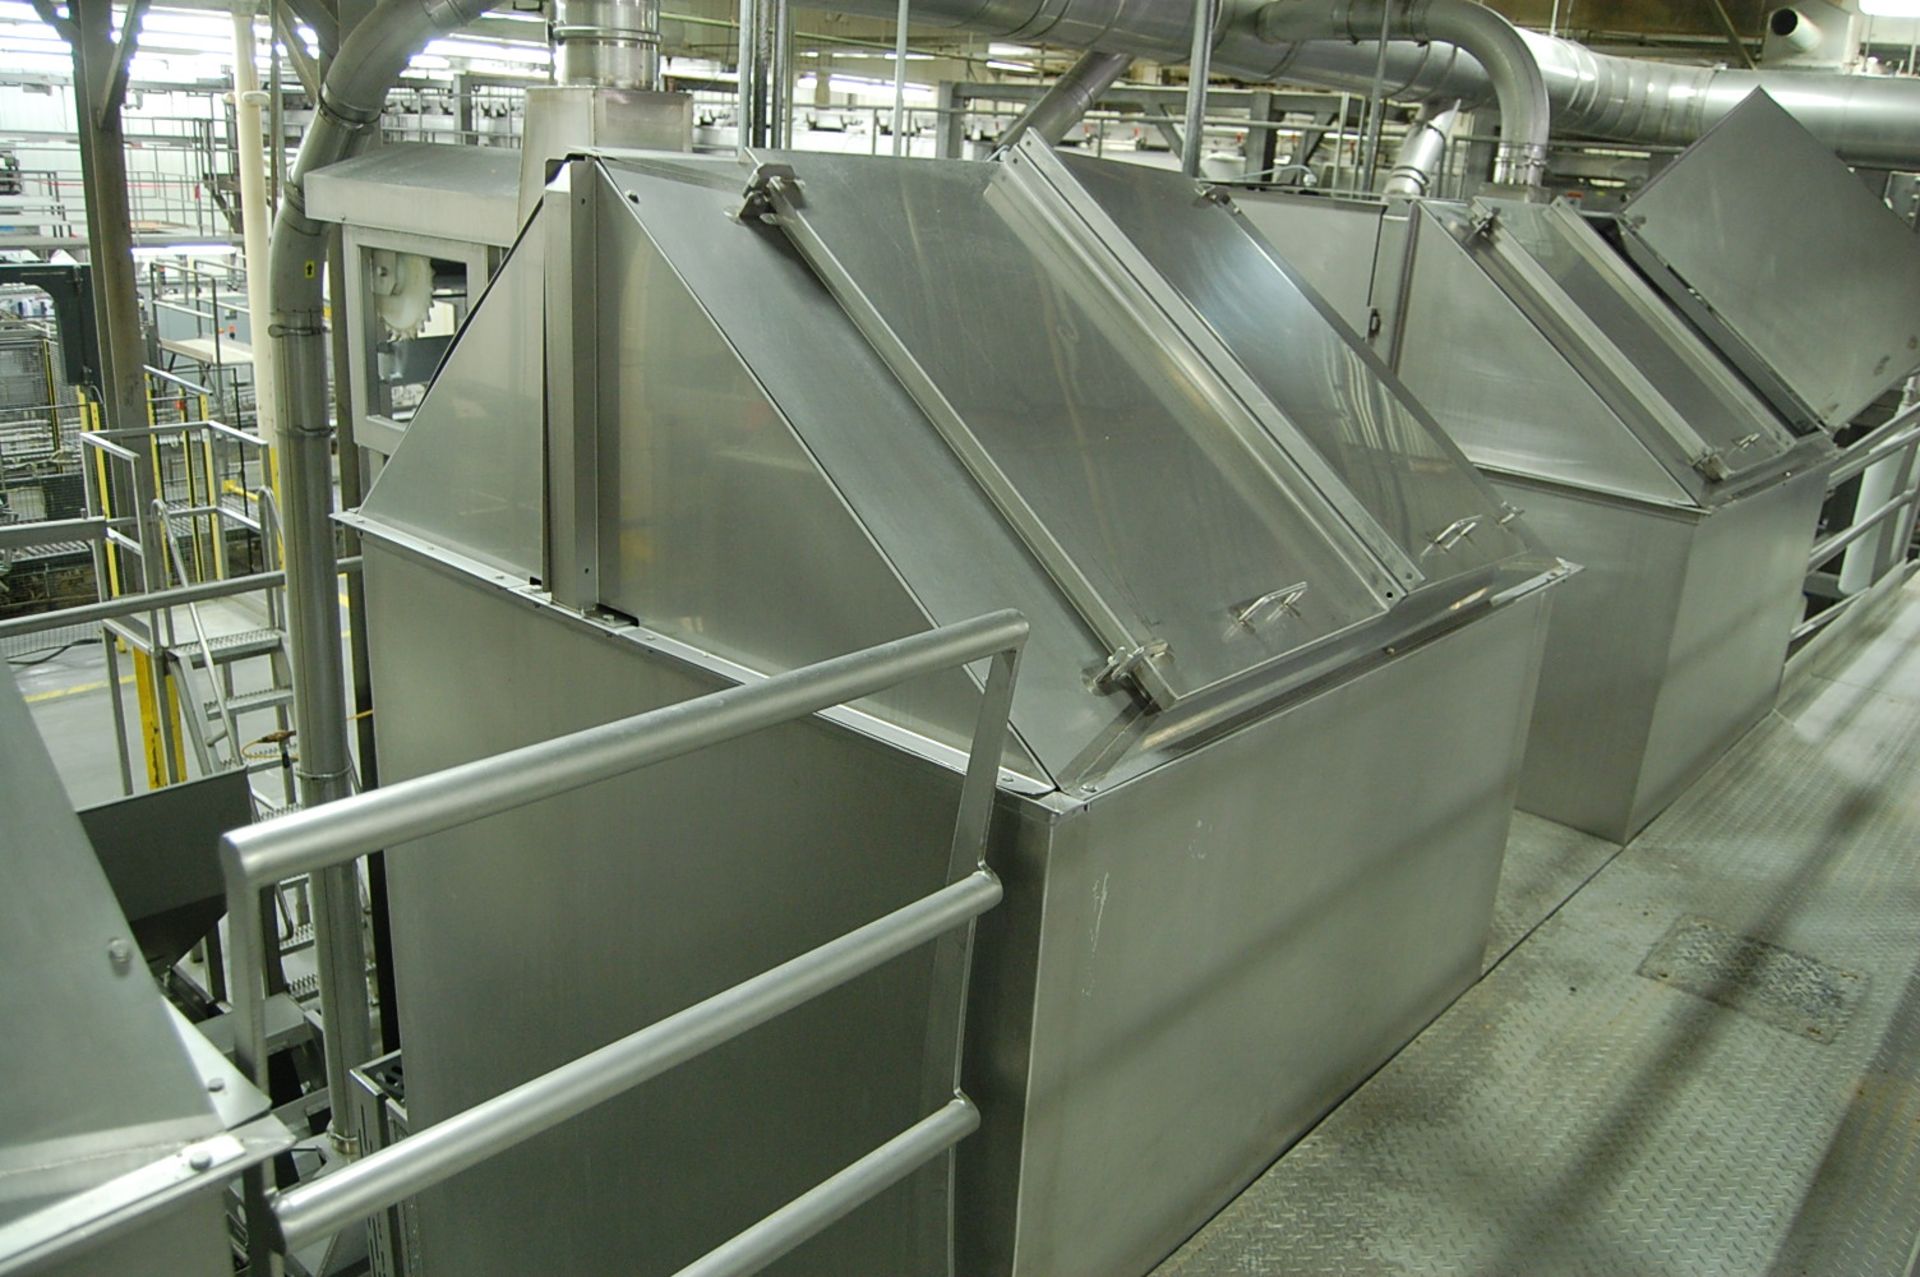 Smalley 60" x 60" Stainless Steel Holding Bin - Image 2 of 5